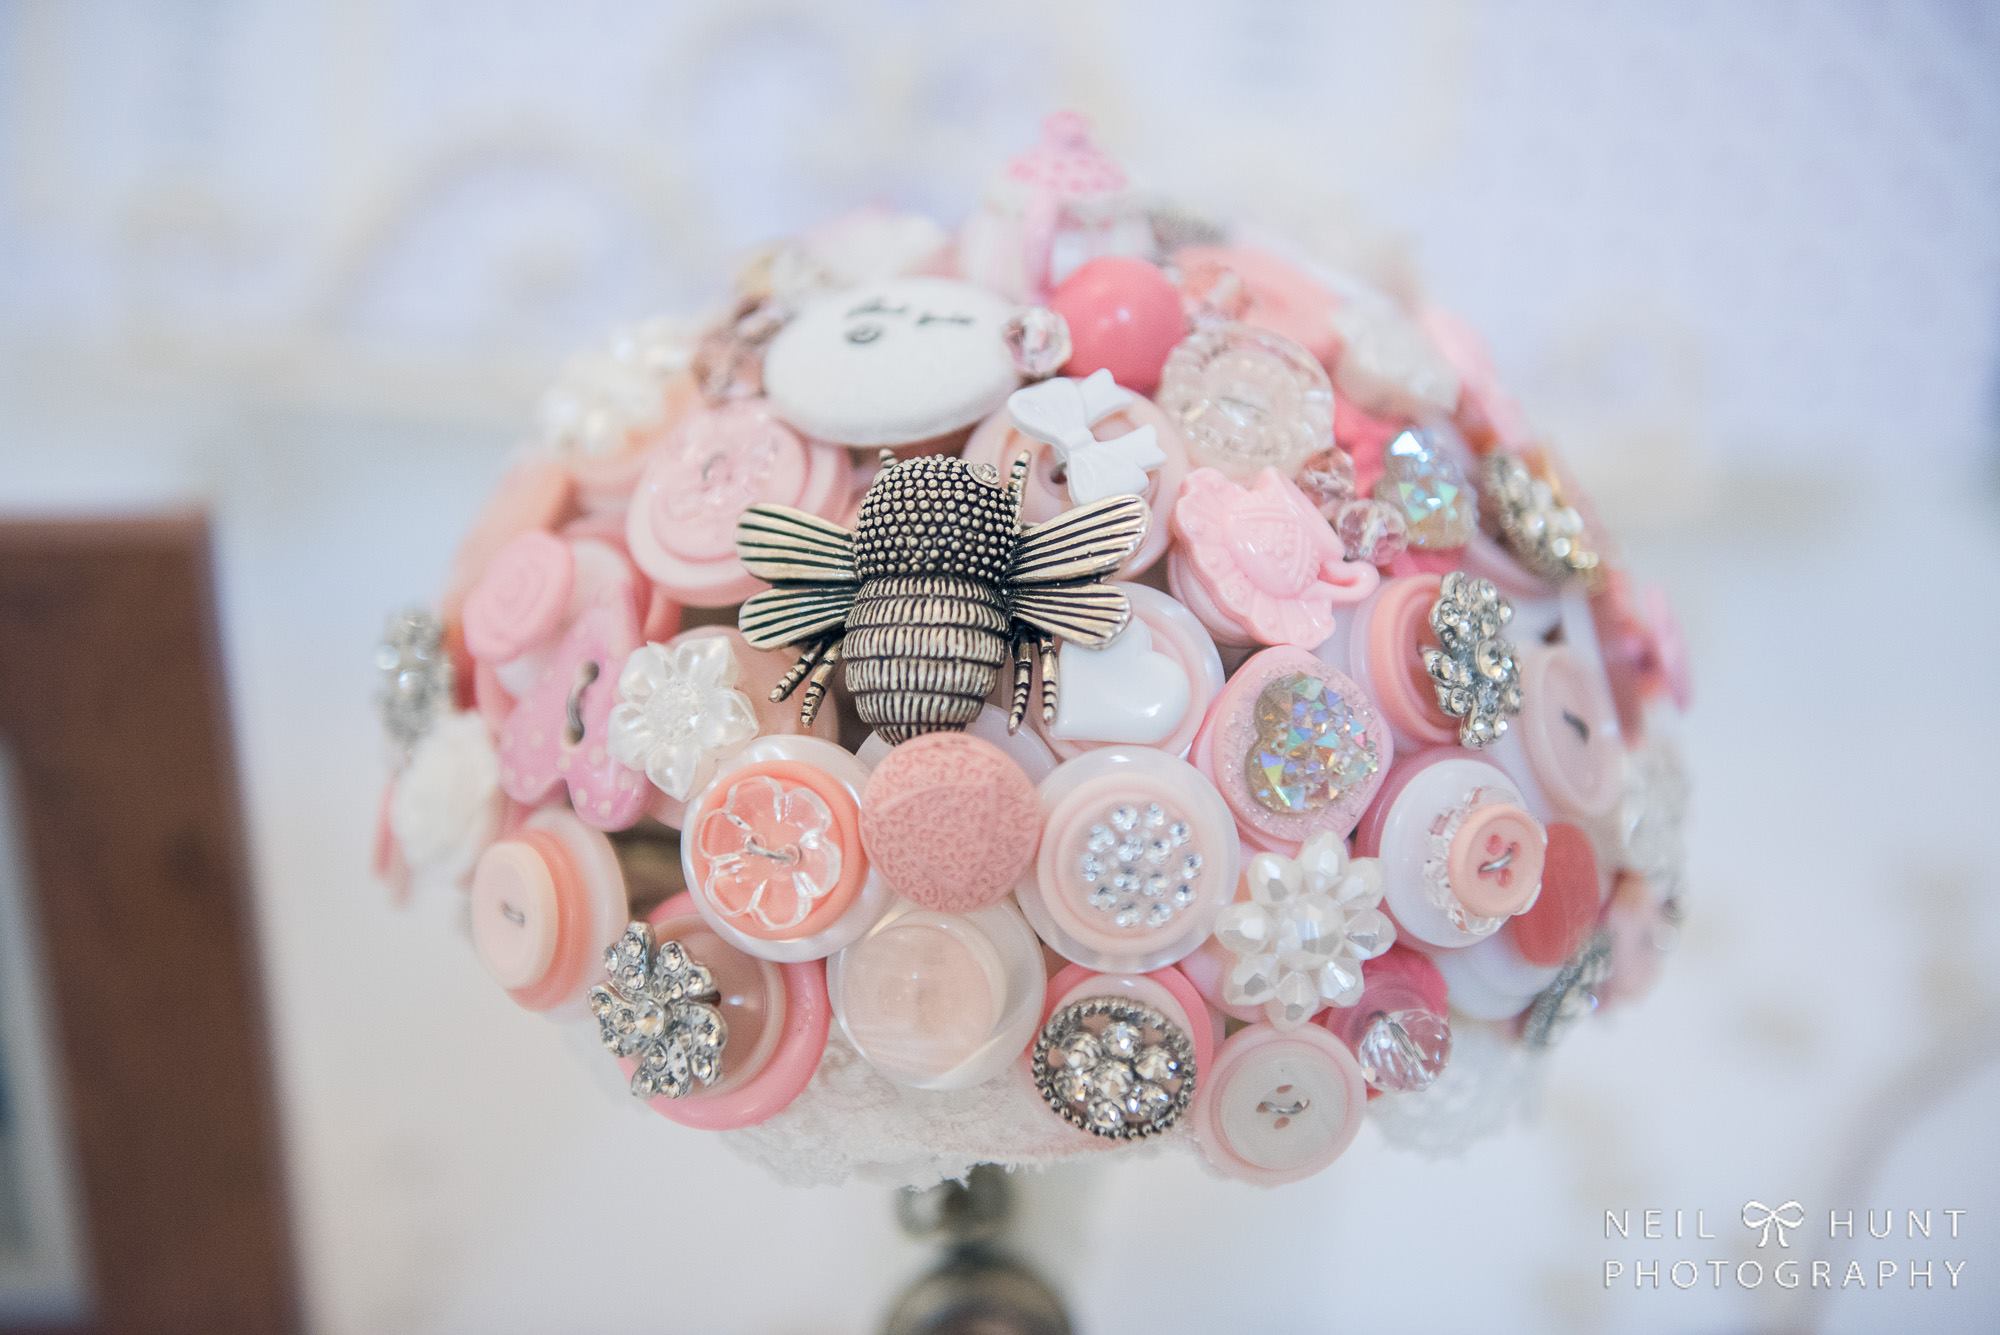 Alice in Wonderland wedding inspiration - button bouquet with bee - alternative and unconventional wedding